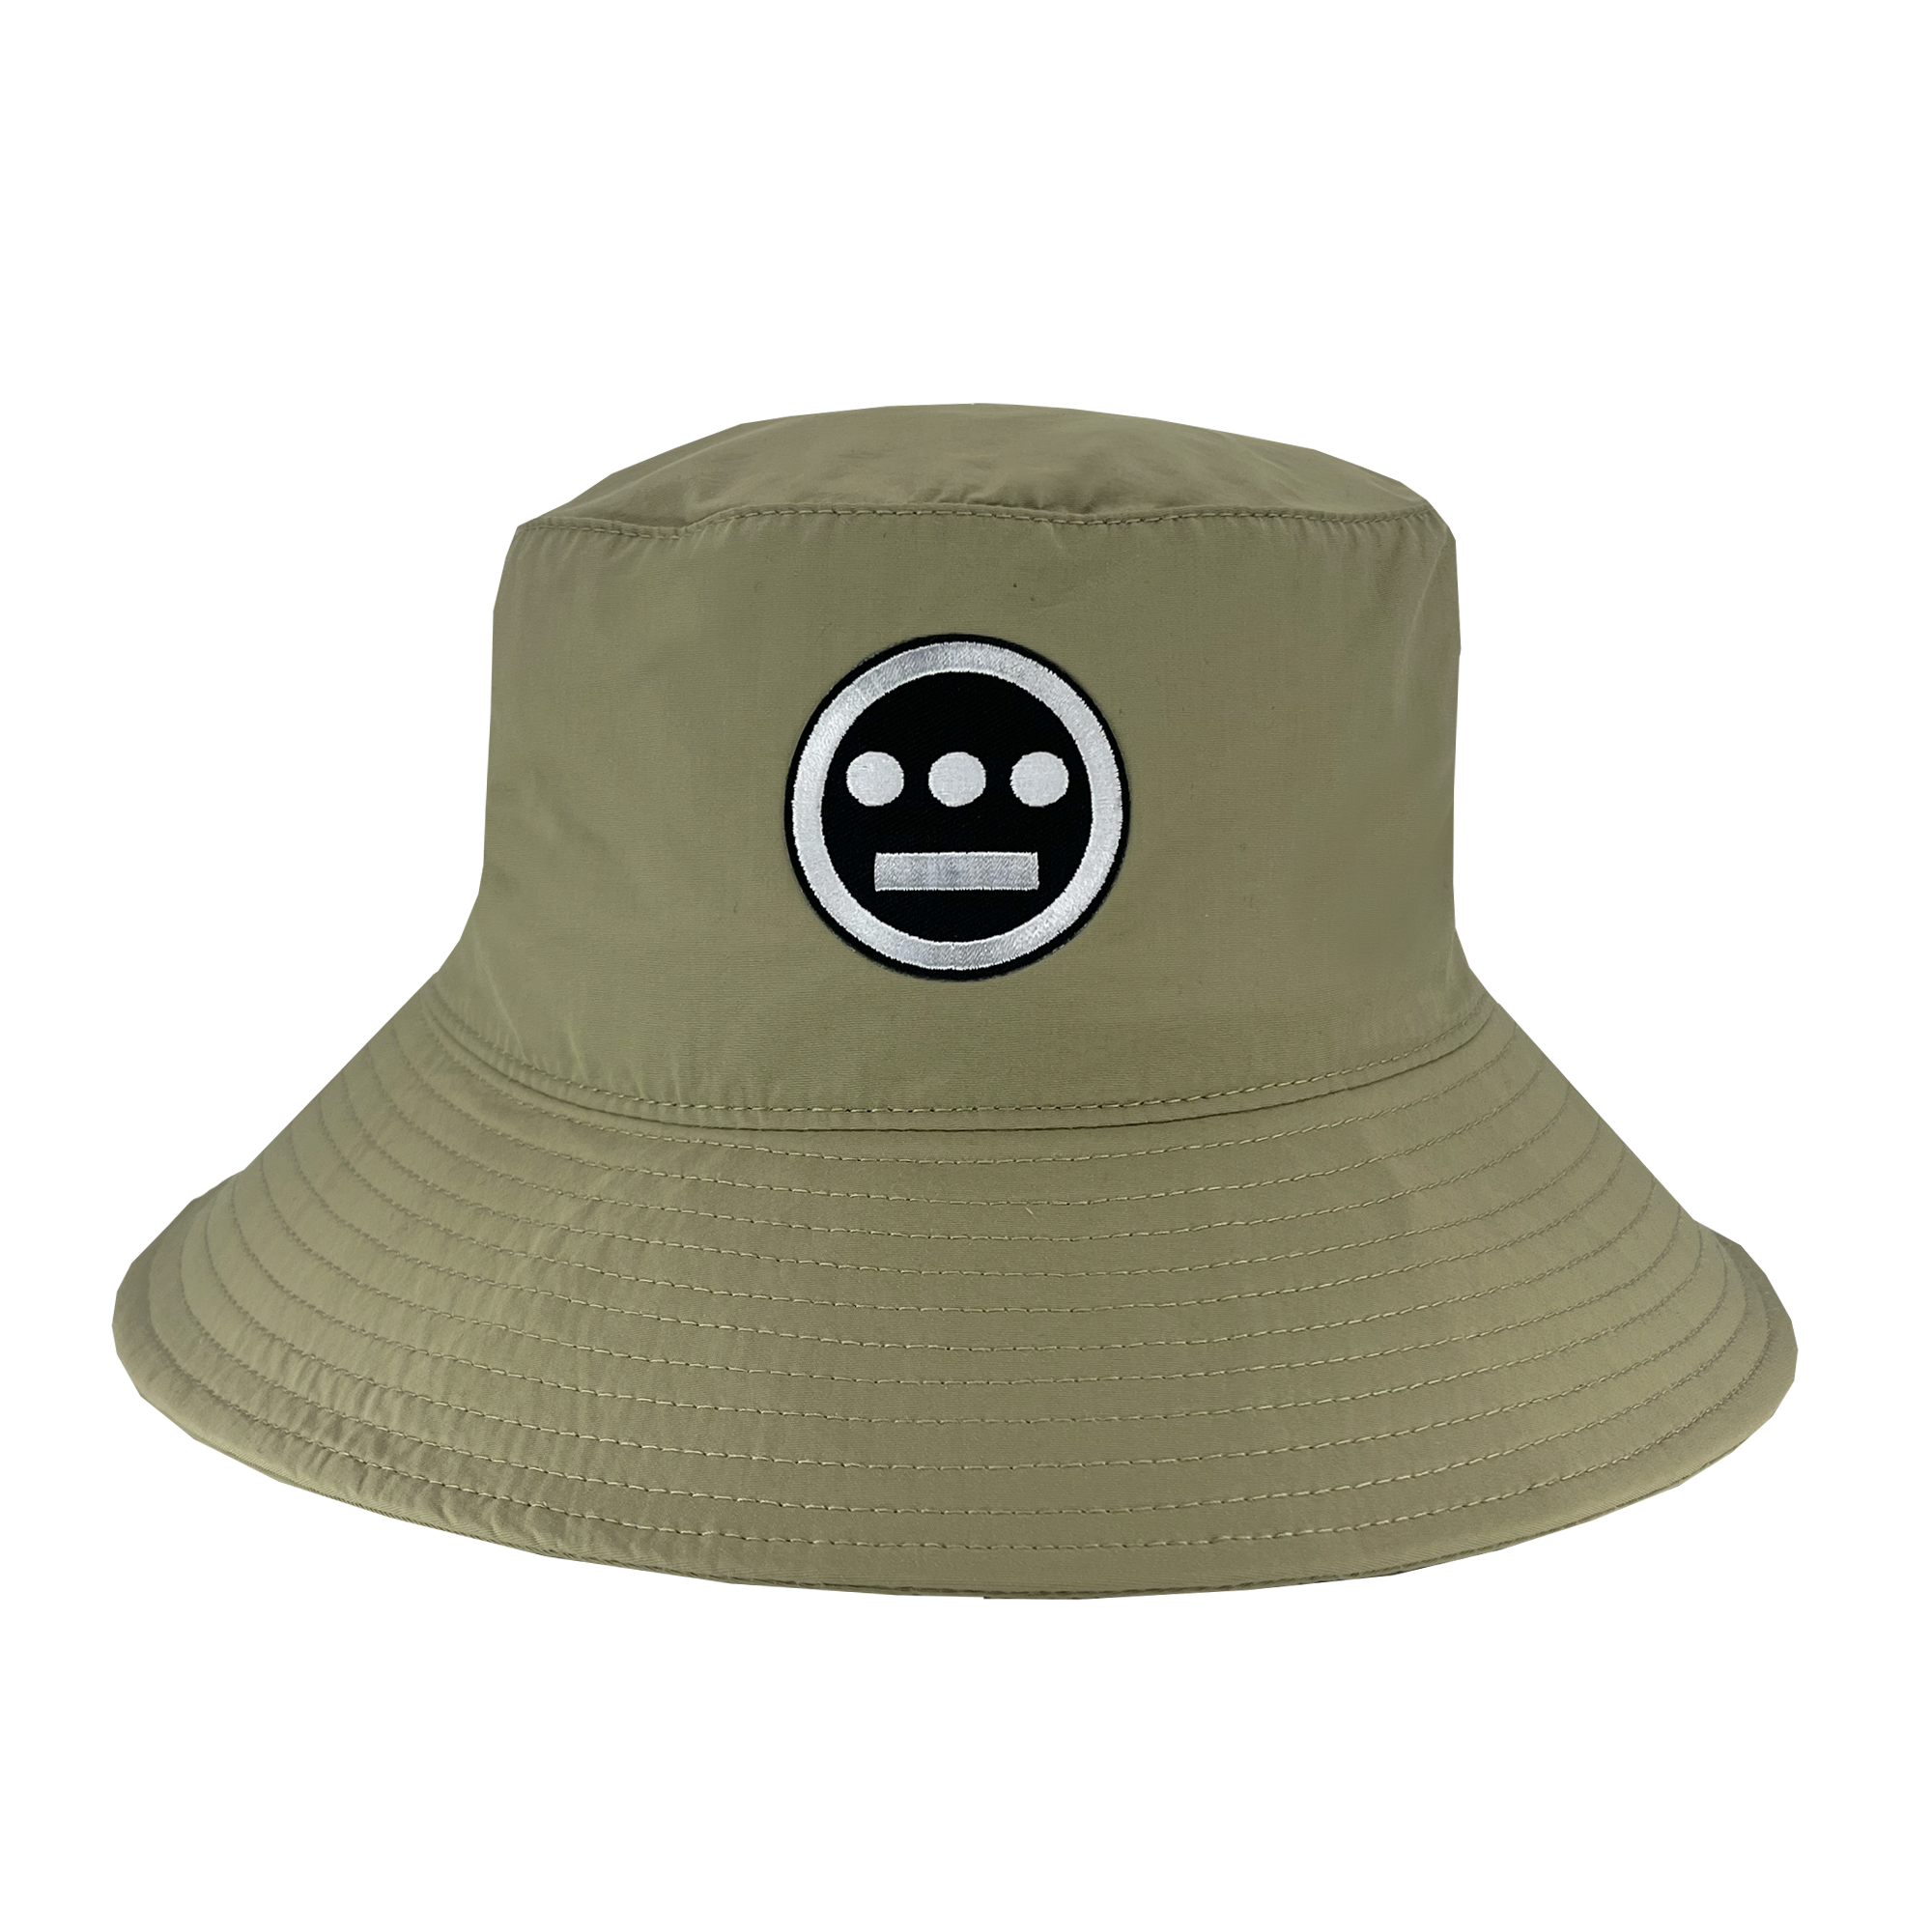 Wide brim khaki bucket hat with toggles and Hiero logo patch .